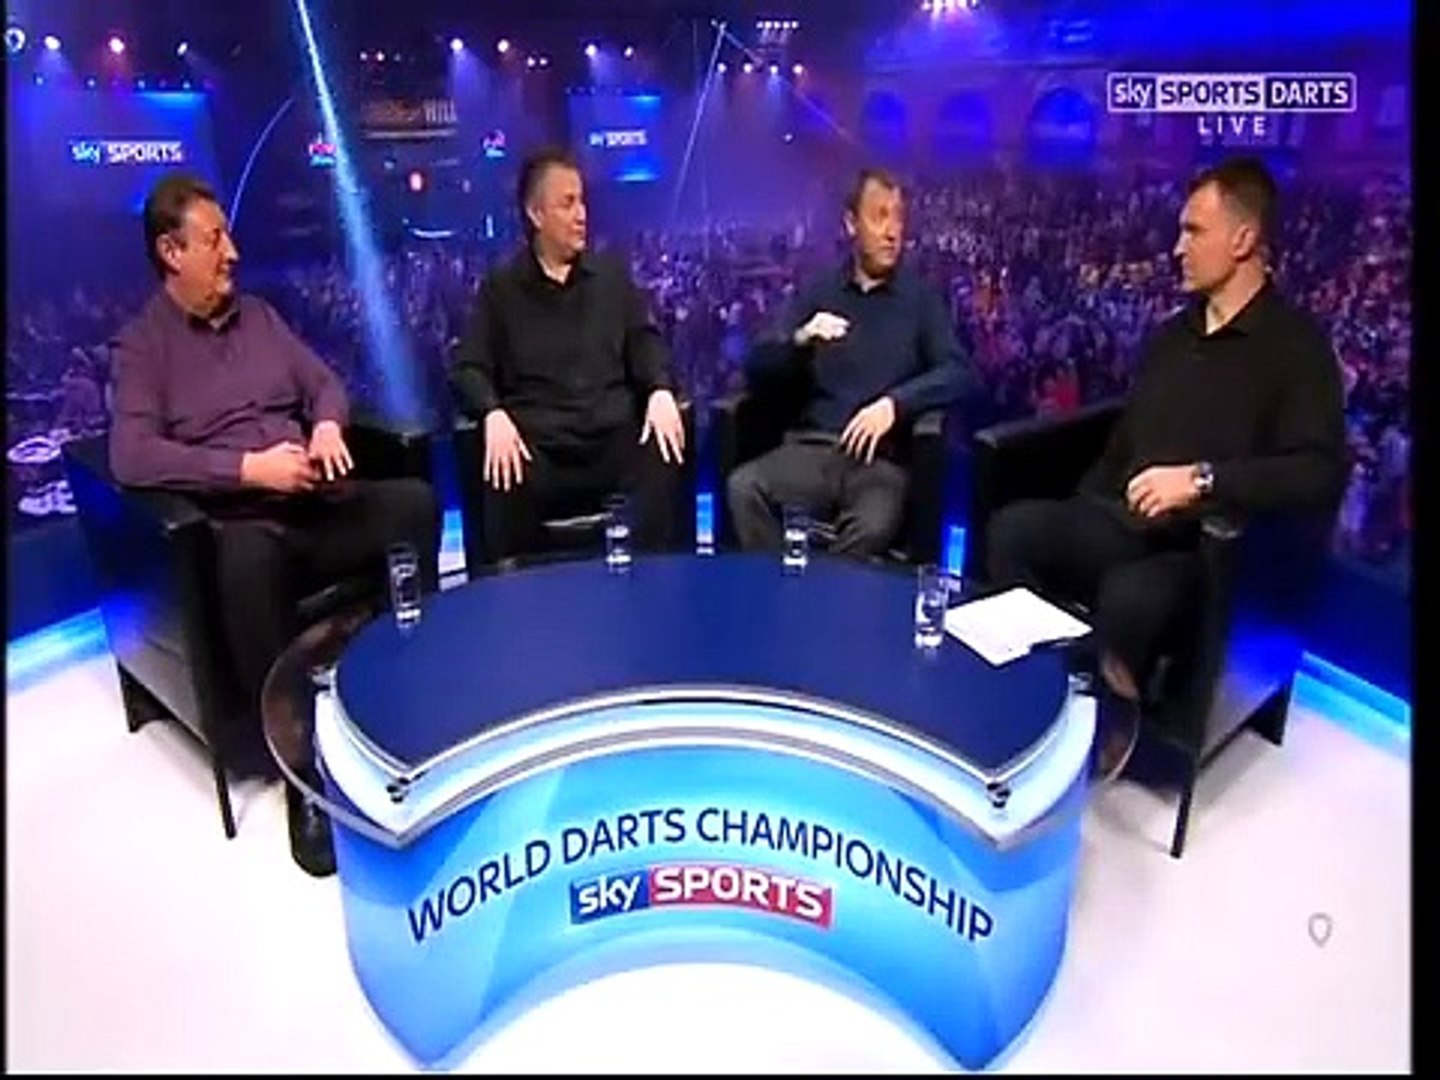 stribet humor patient PDC World Darts Championship Final 2015 - Gary Anderson vs Phil Taylor 1of4  - video Dailymotion